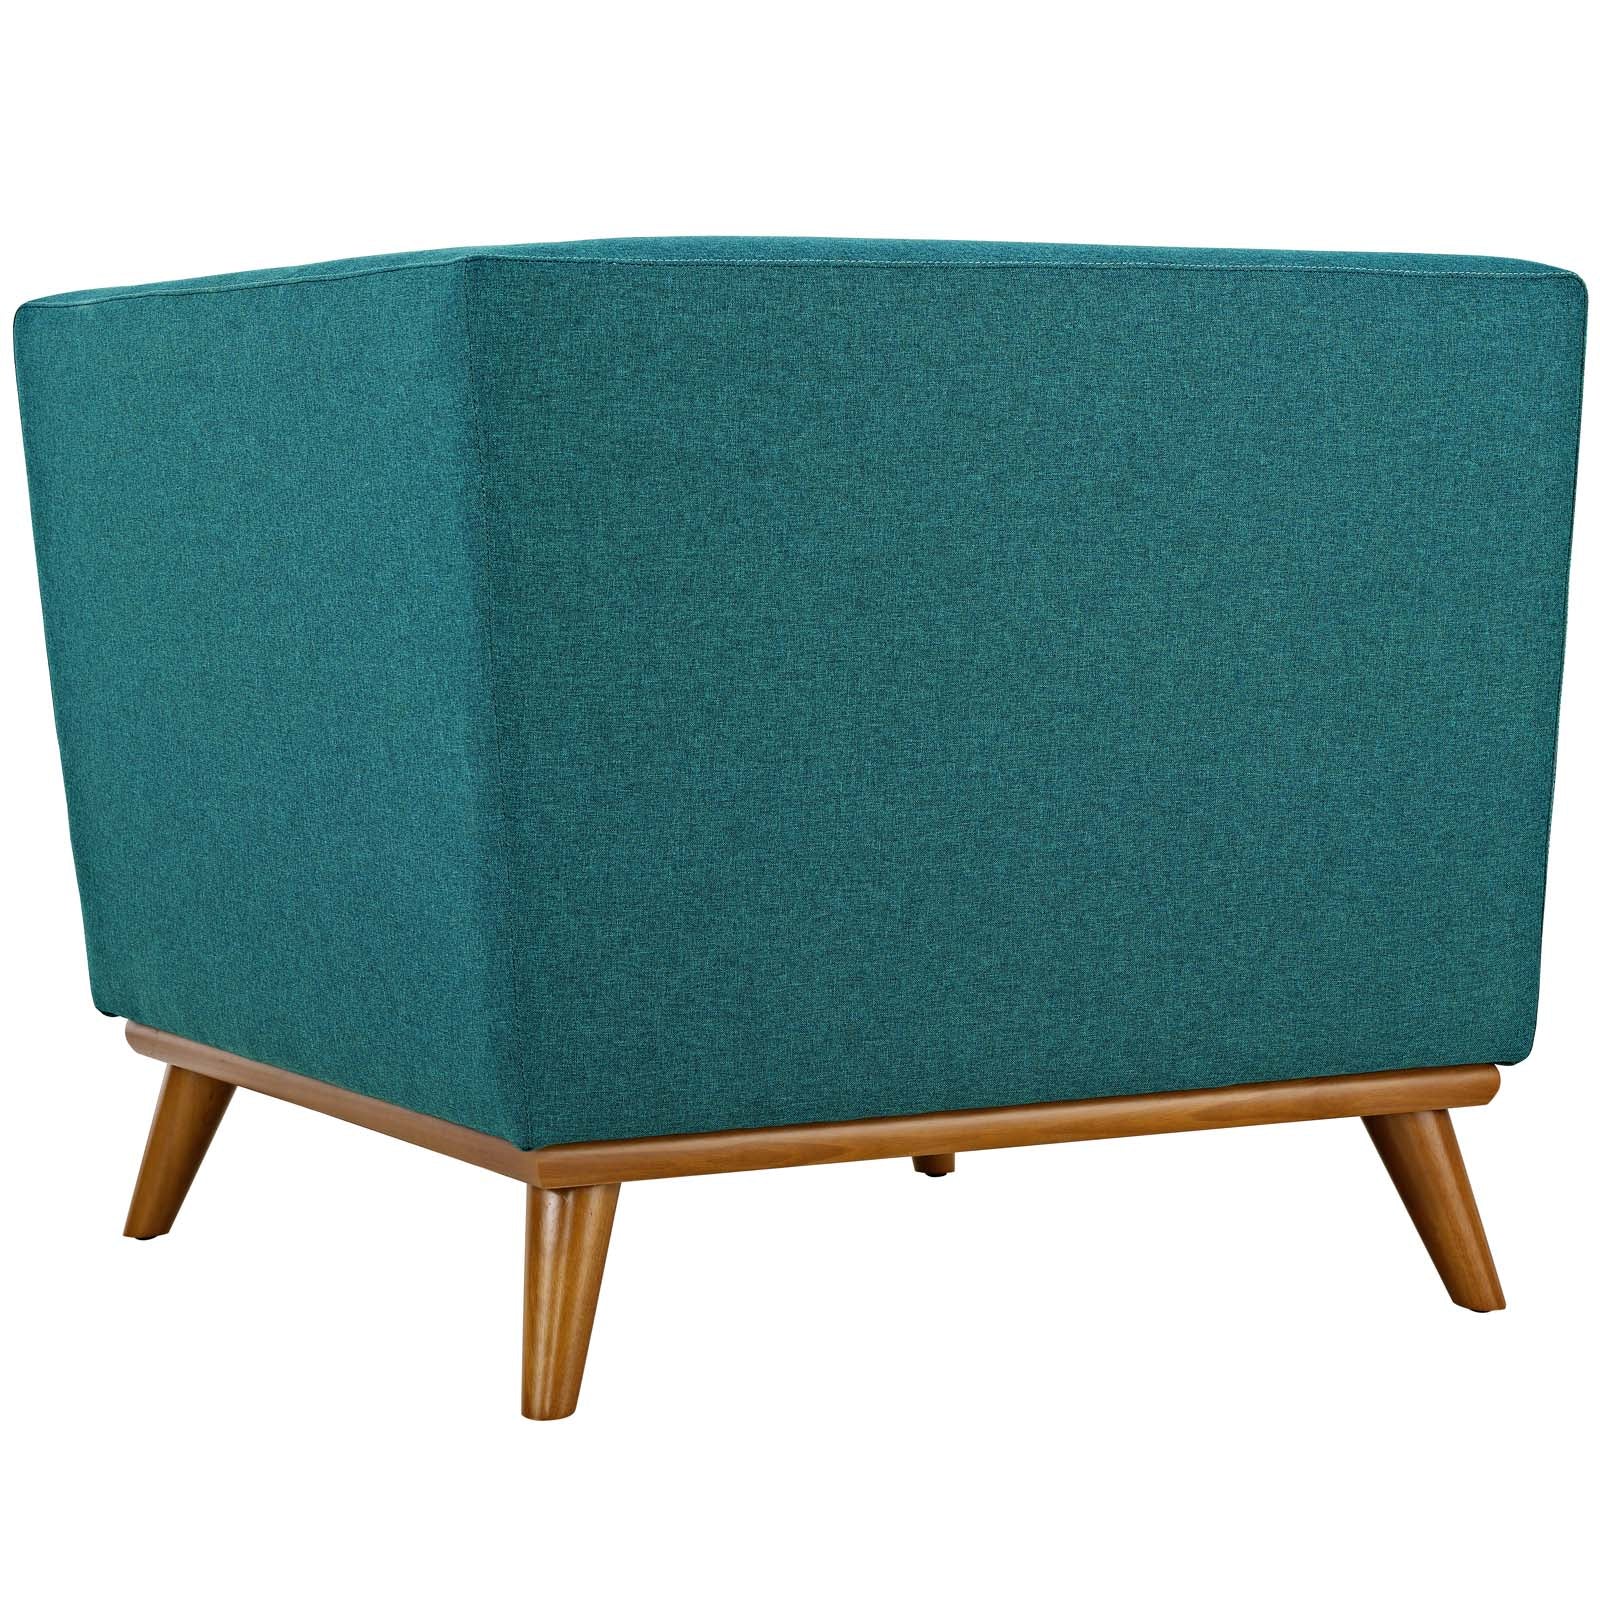 Engage Upholstered Fabric Corner Chair